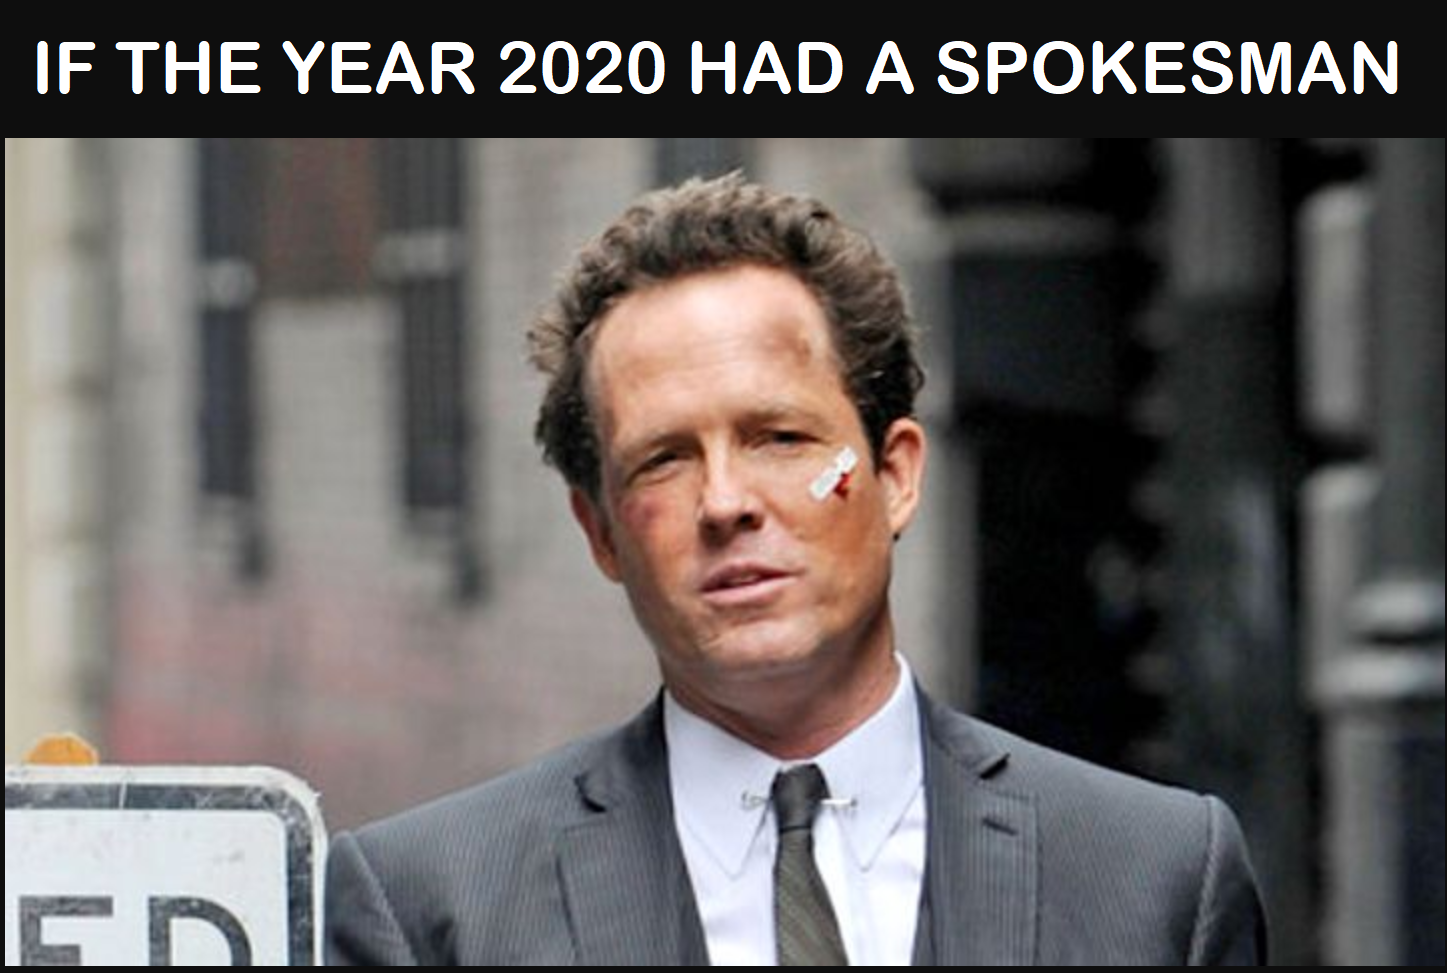 2020 should have gone with Allstate